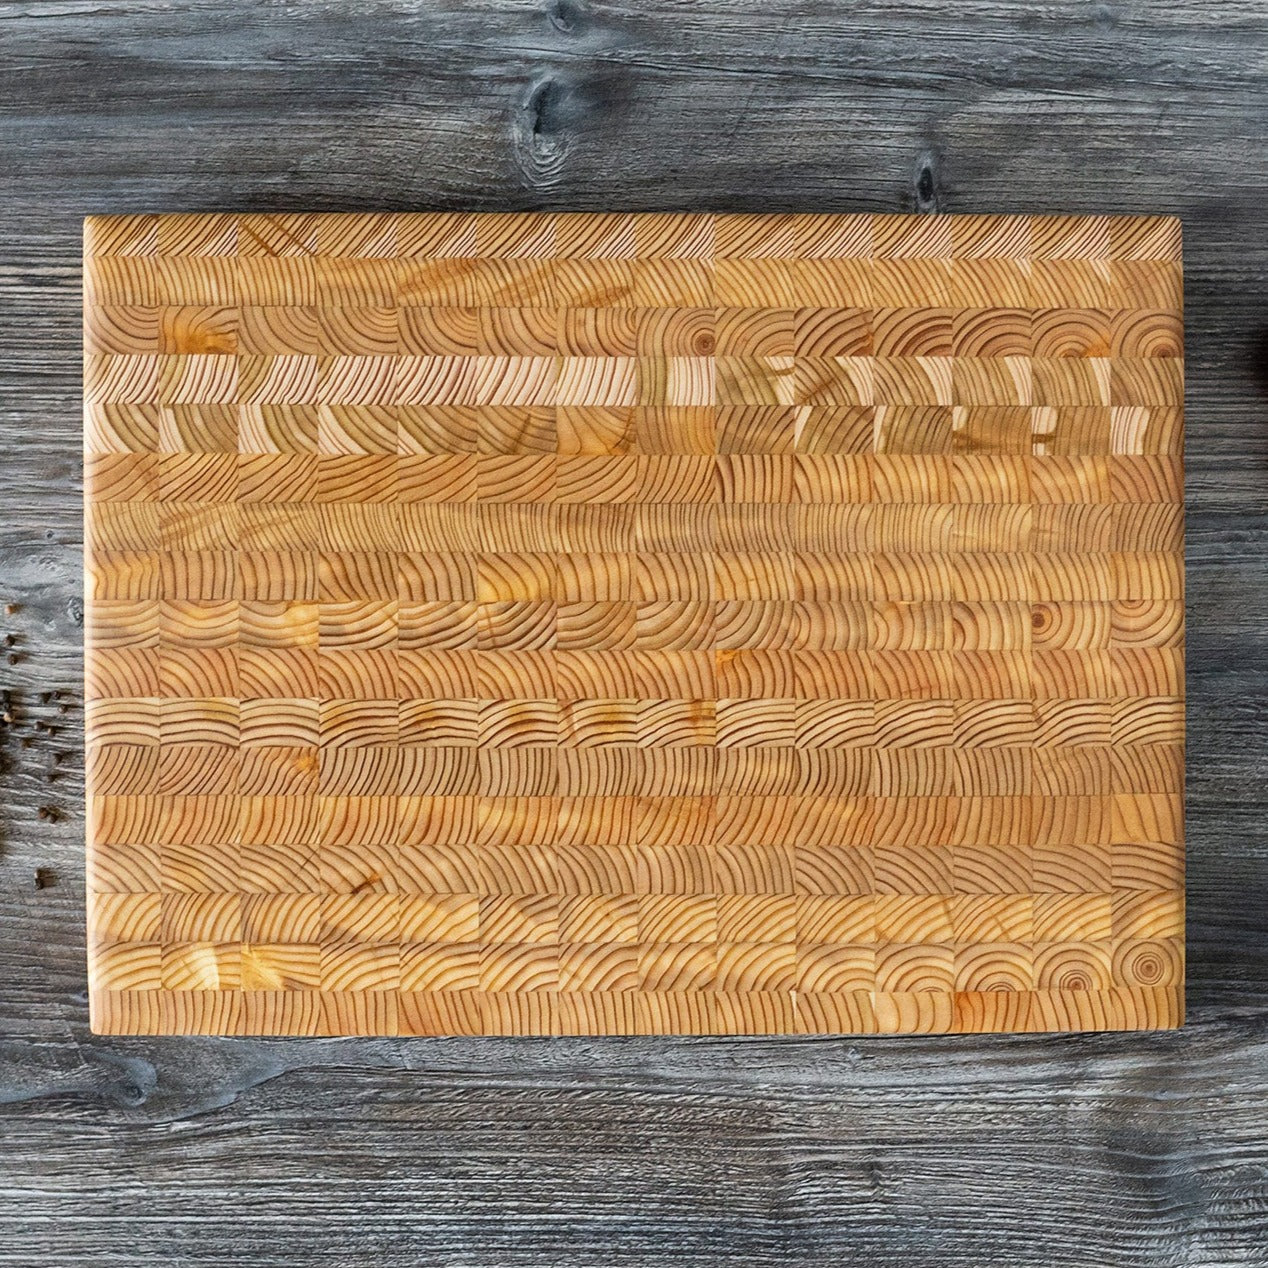 Square SQ End Grain Cutting Board by Larch Wood